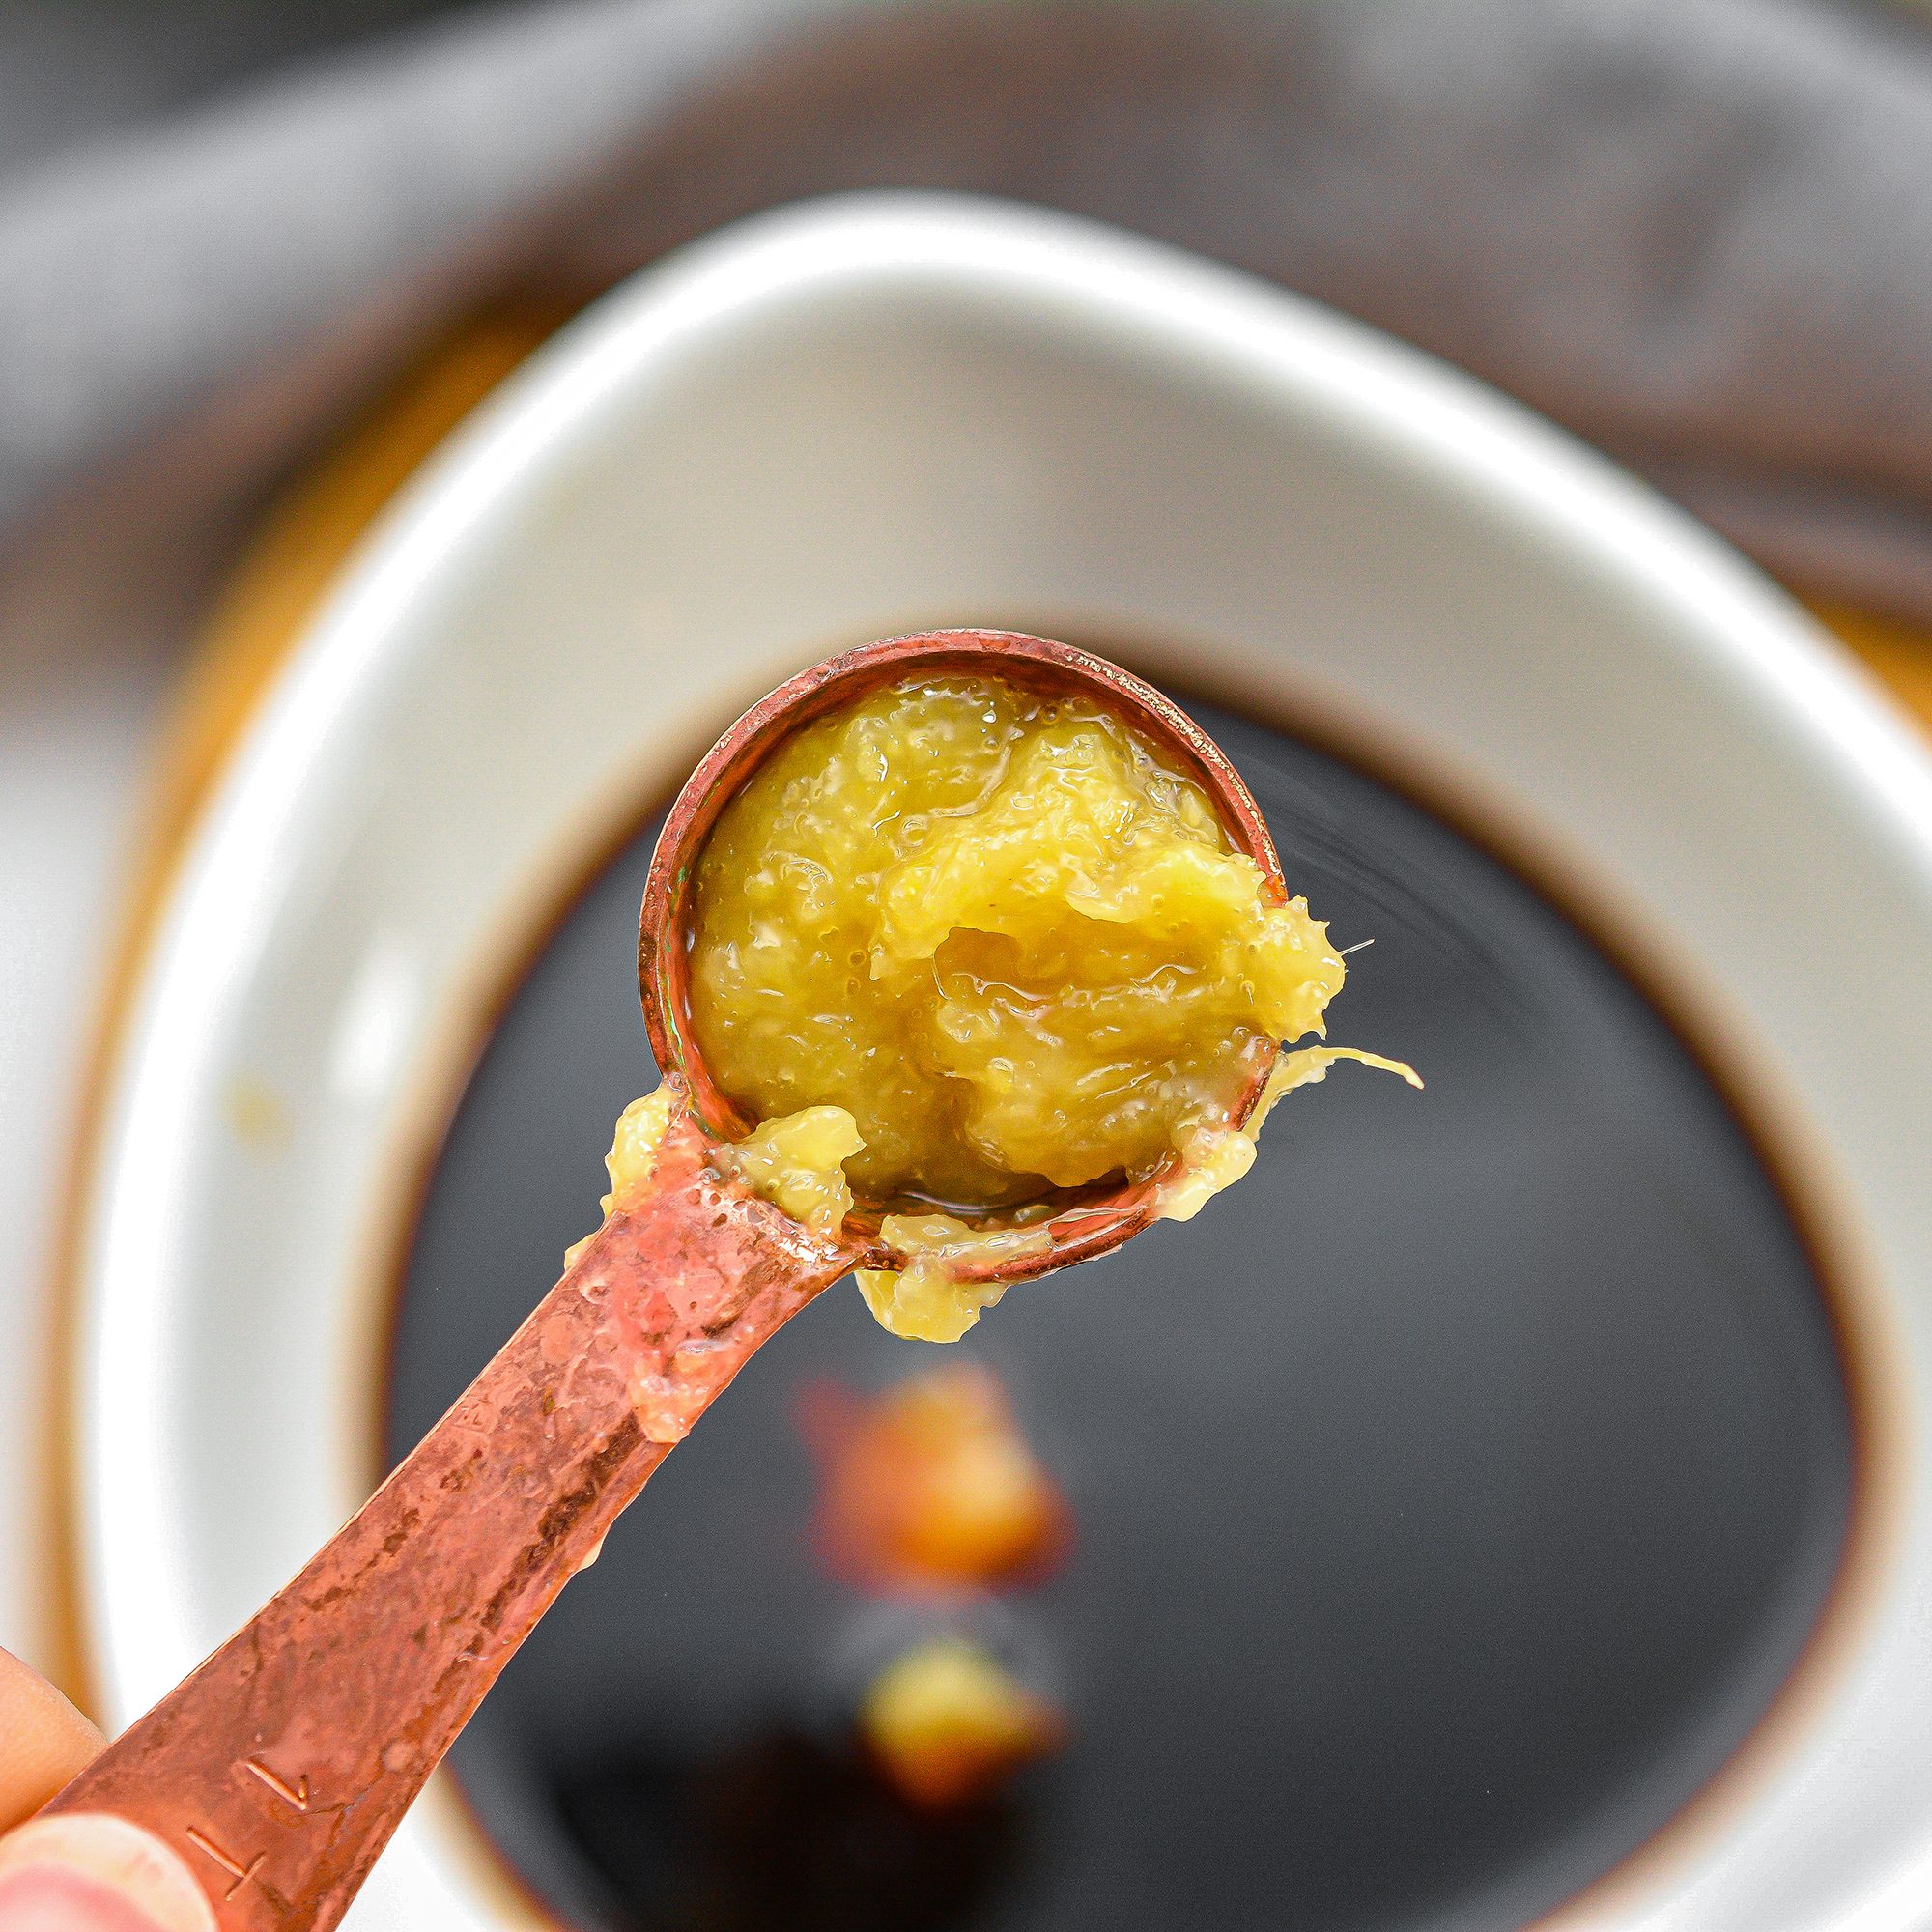 In a bowl, combine the soy sauce, chicken broth, ½ cup sugar, ginger paste, and rice wine vinegar.